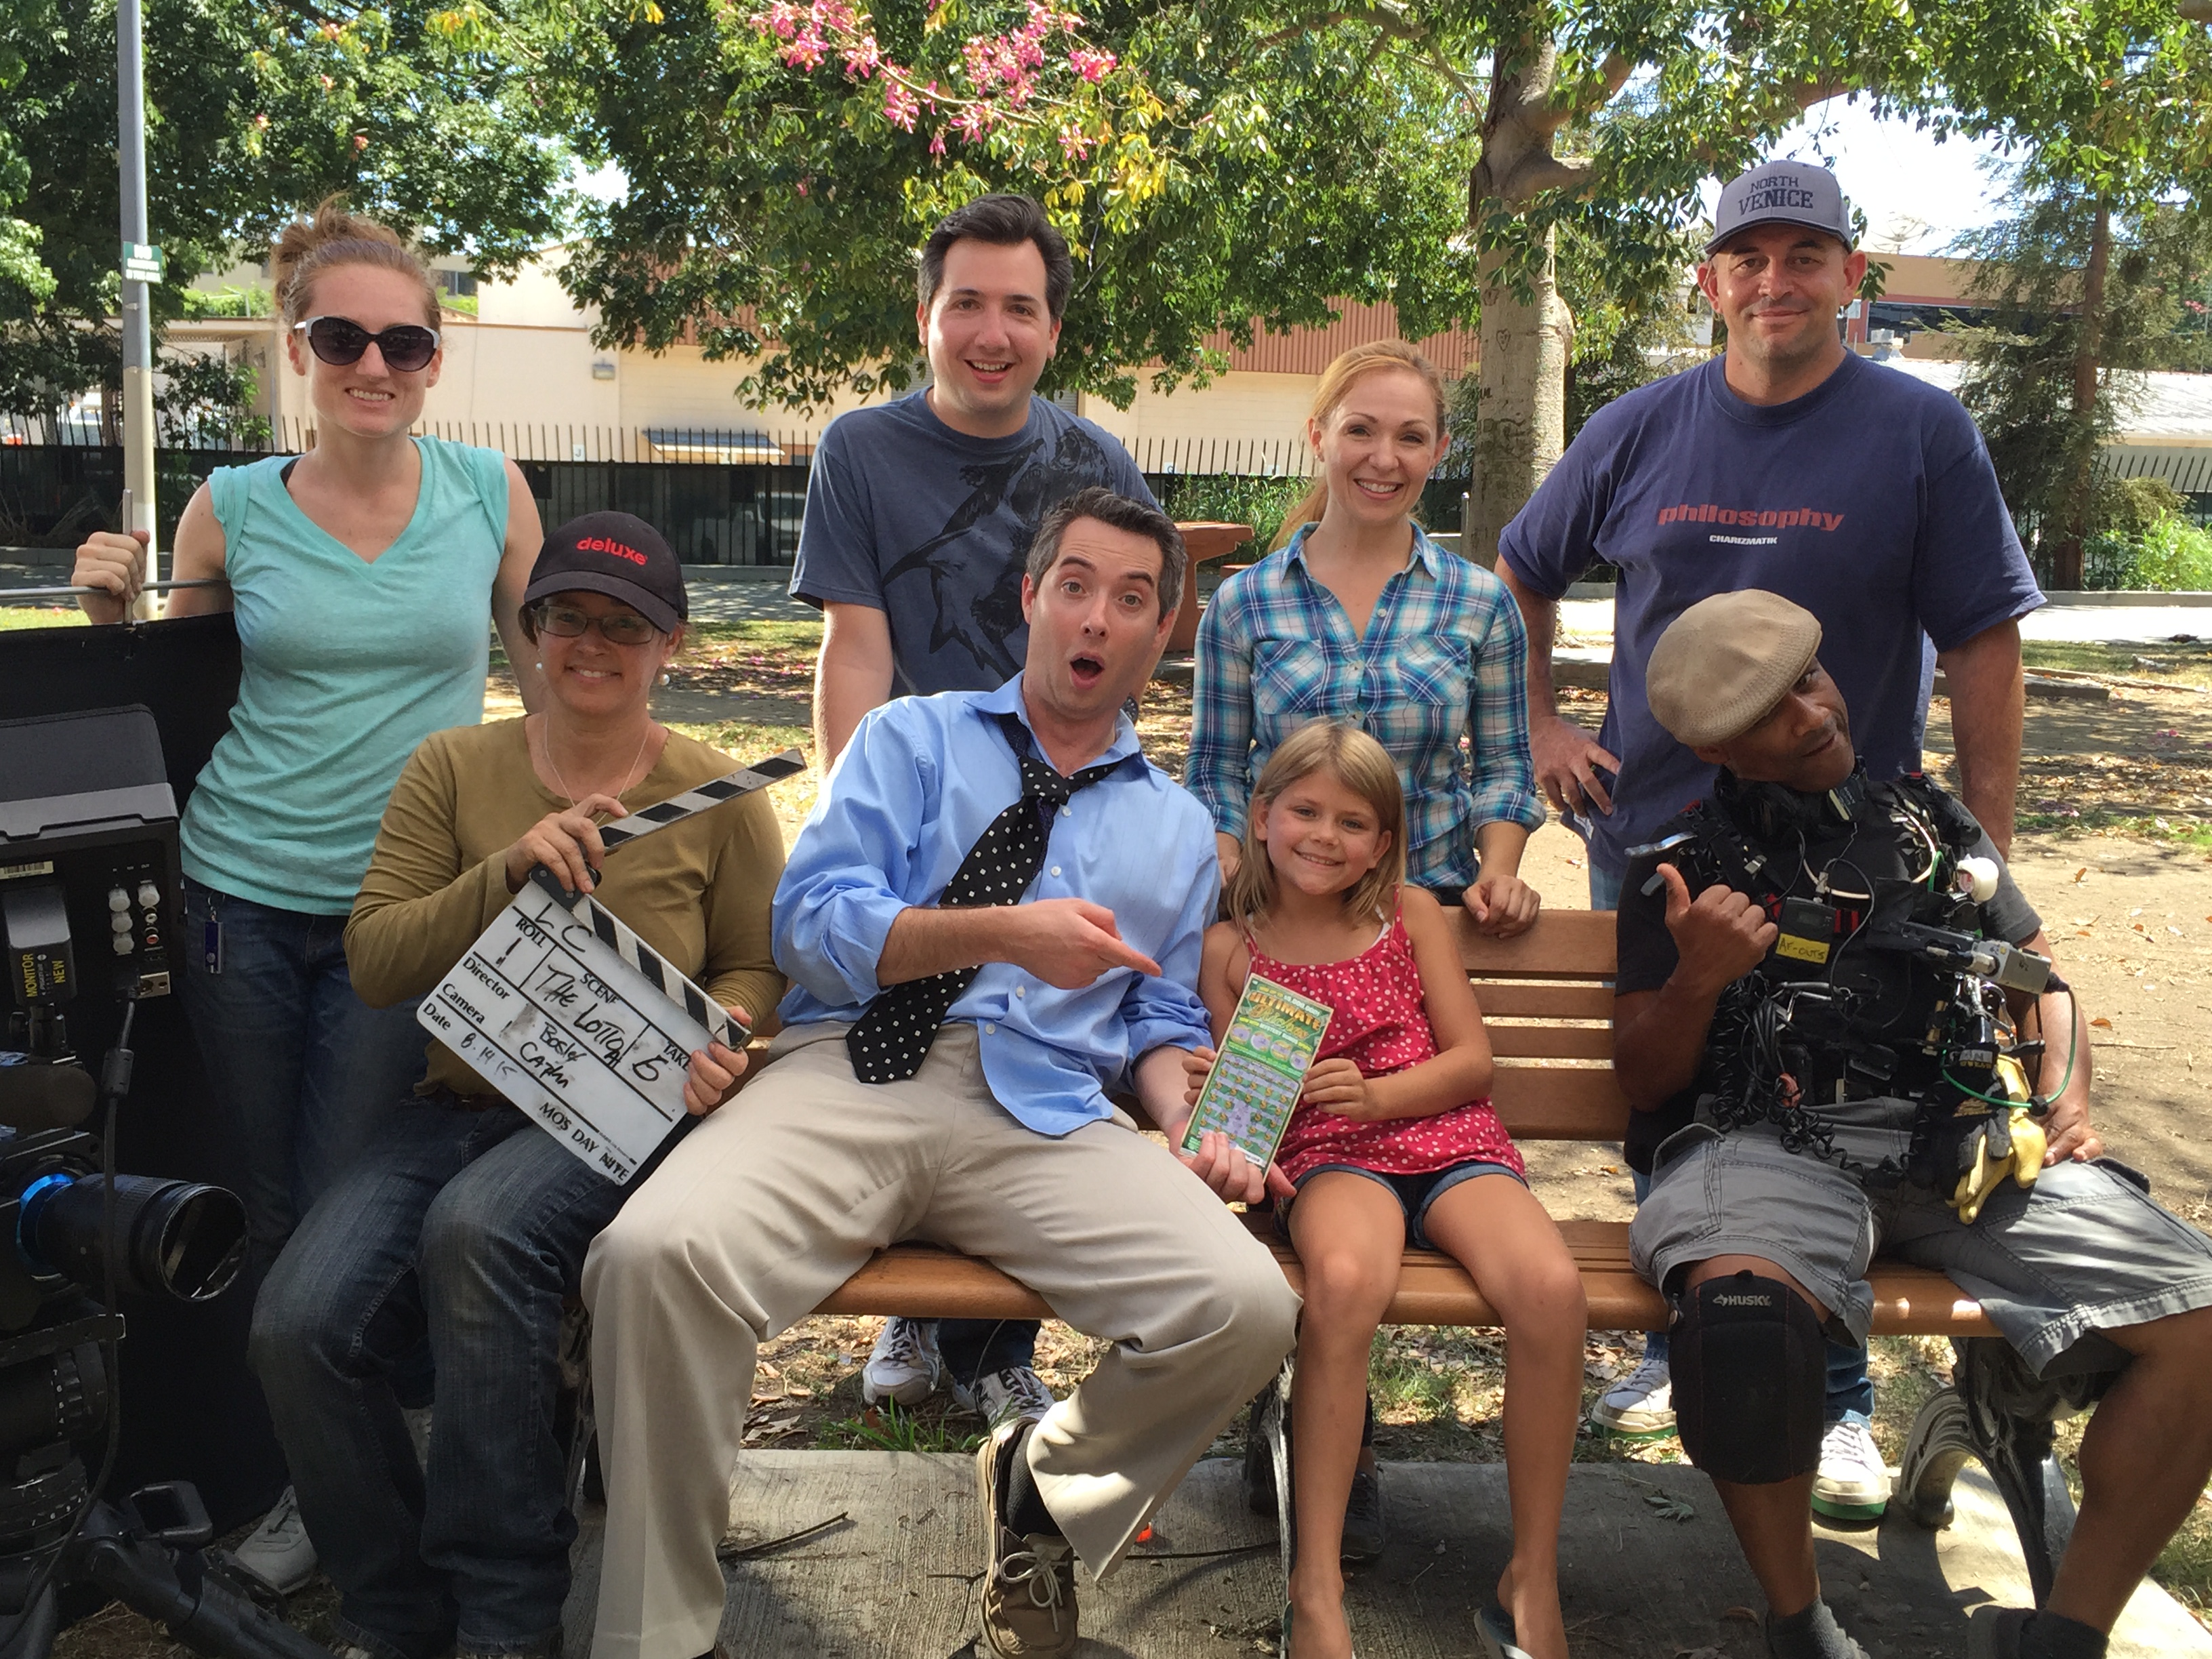 LenseCrafters commercial with Evan Michael, director Brad Bosley & his awesome crew